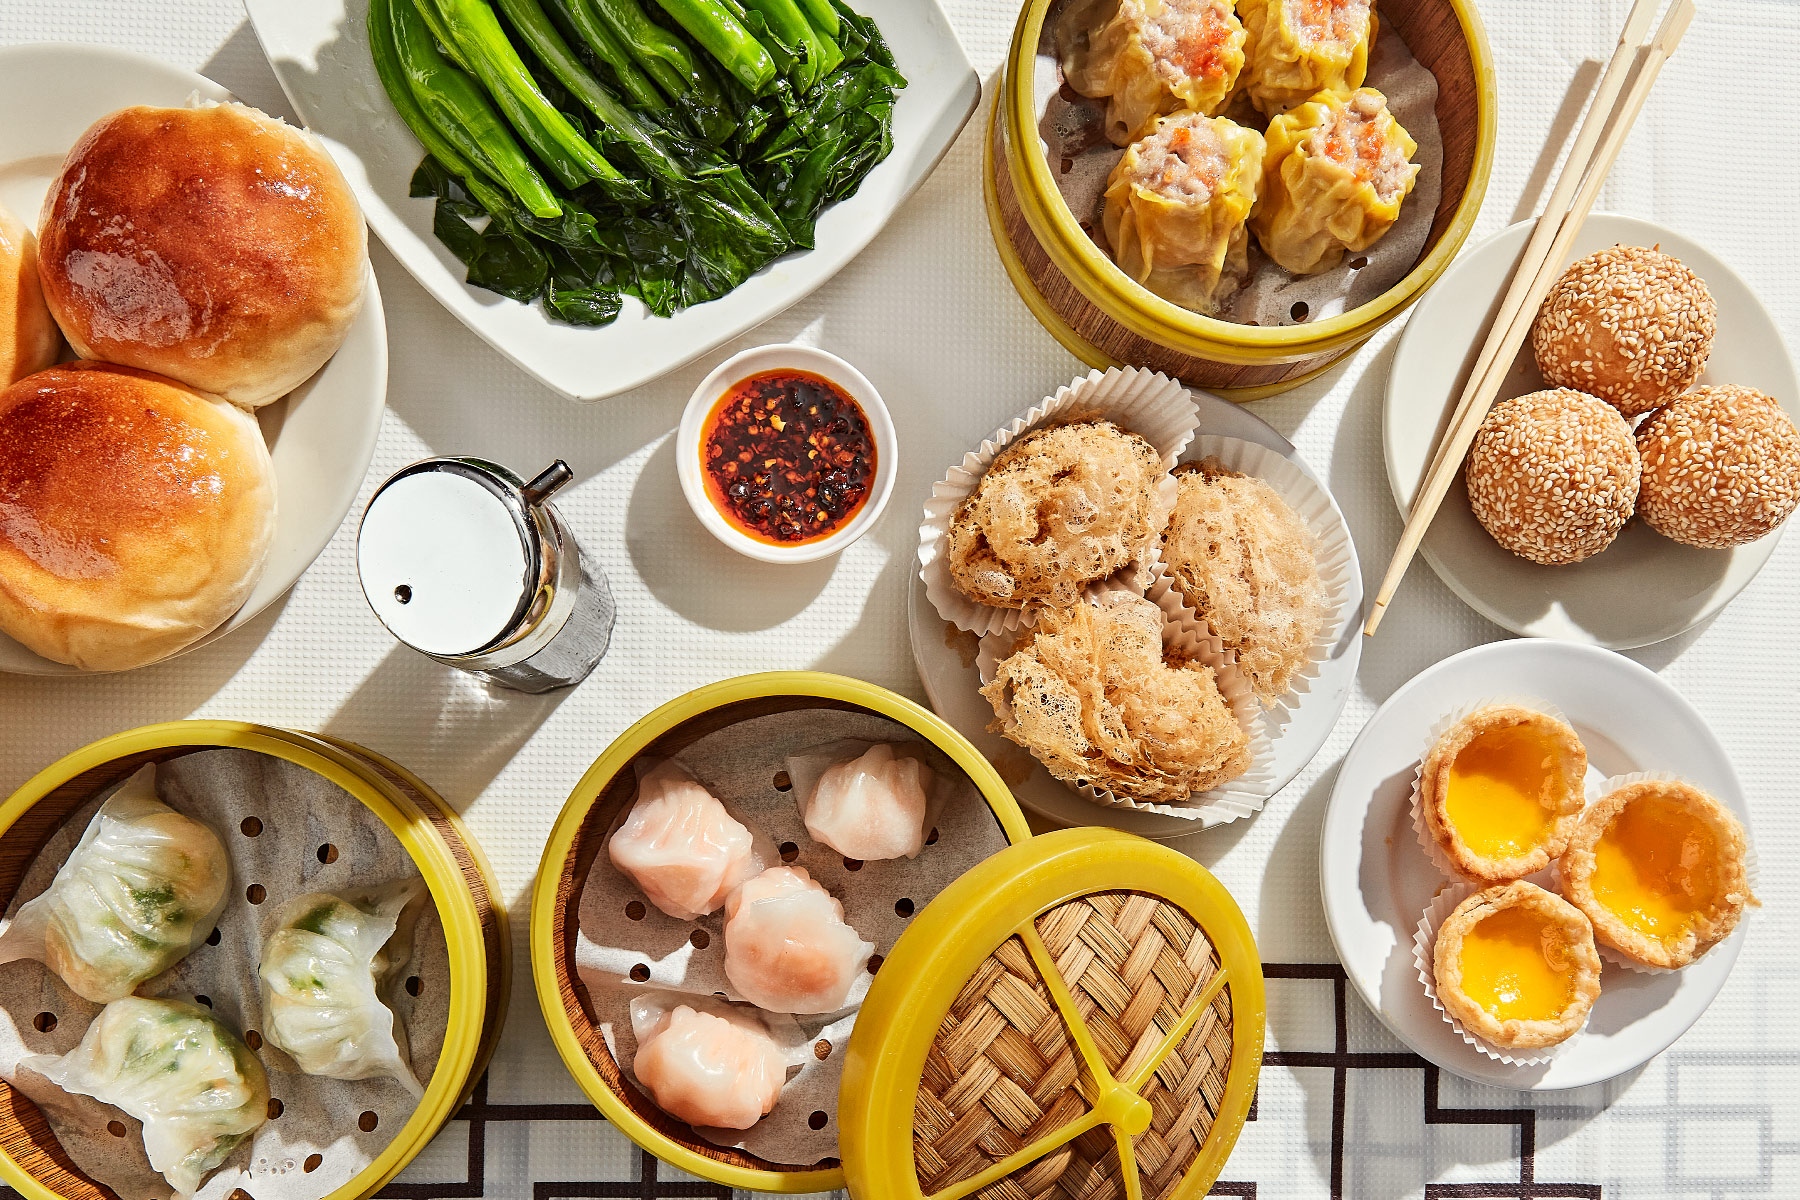 Hankering for Chinese Food? These Spots Are Open This Christmas.